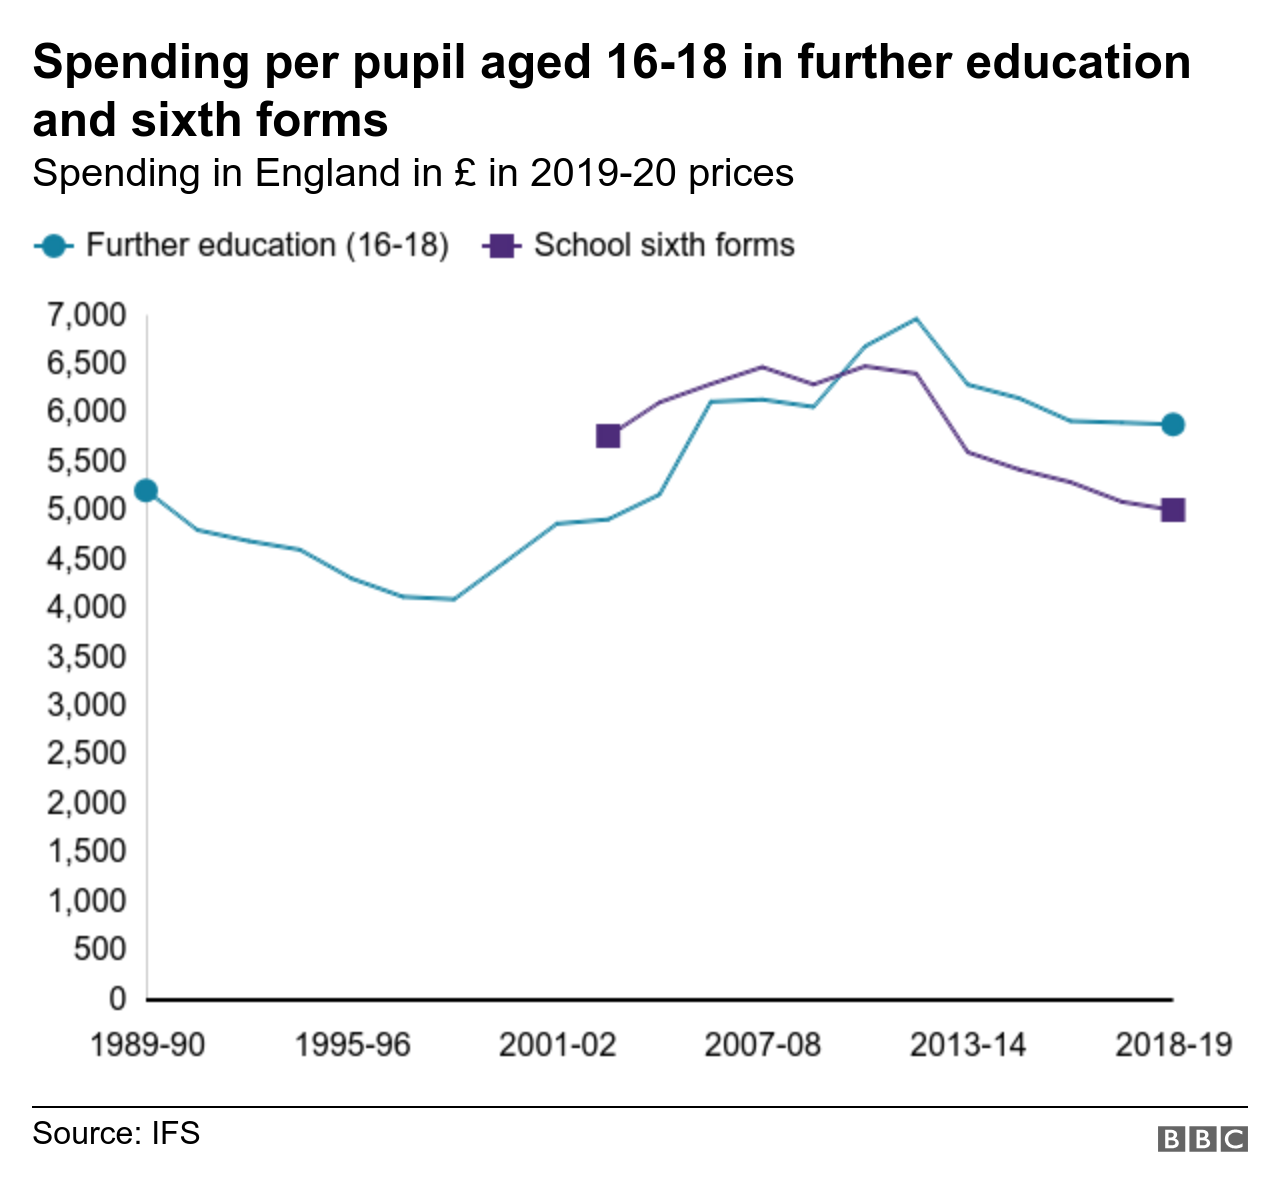 Chart showing spending per pupil aged 16-18